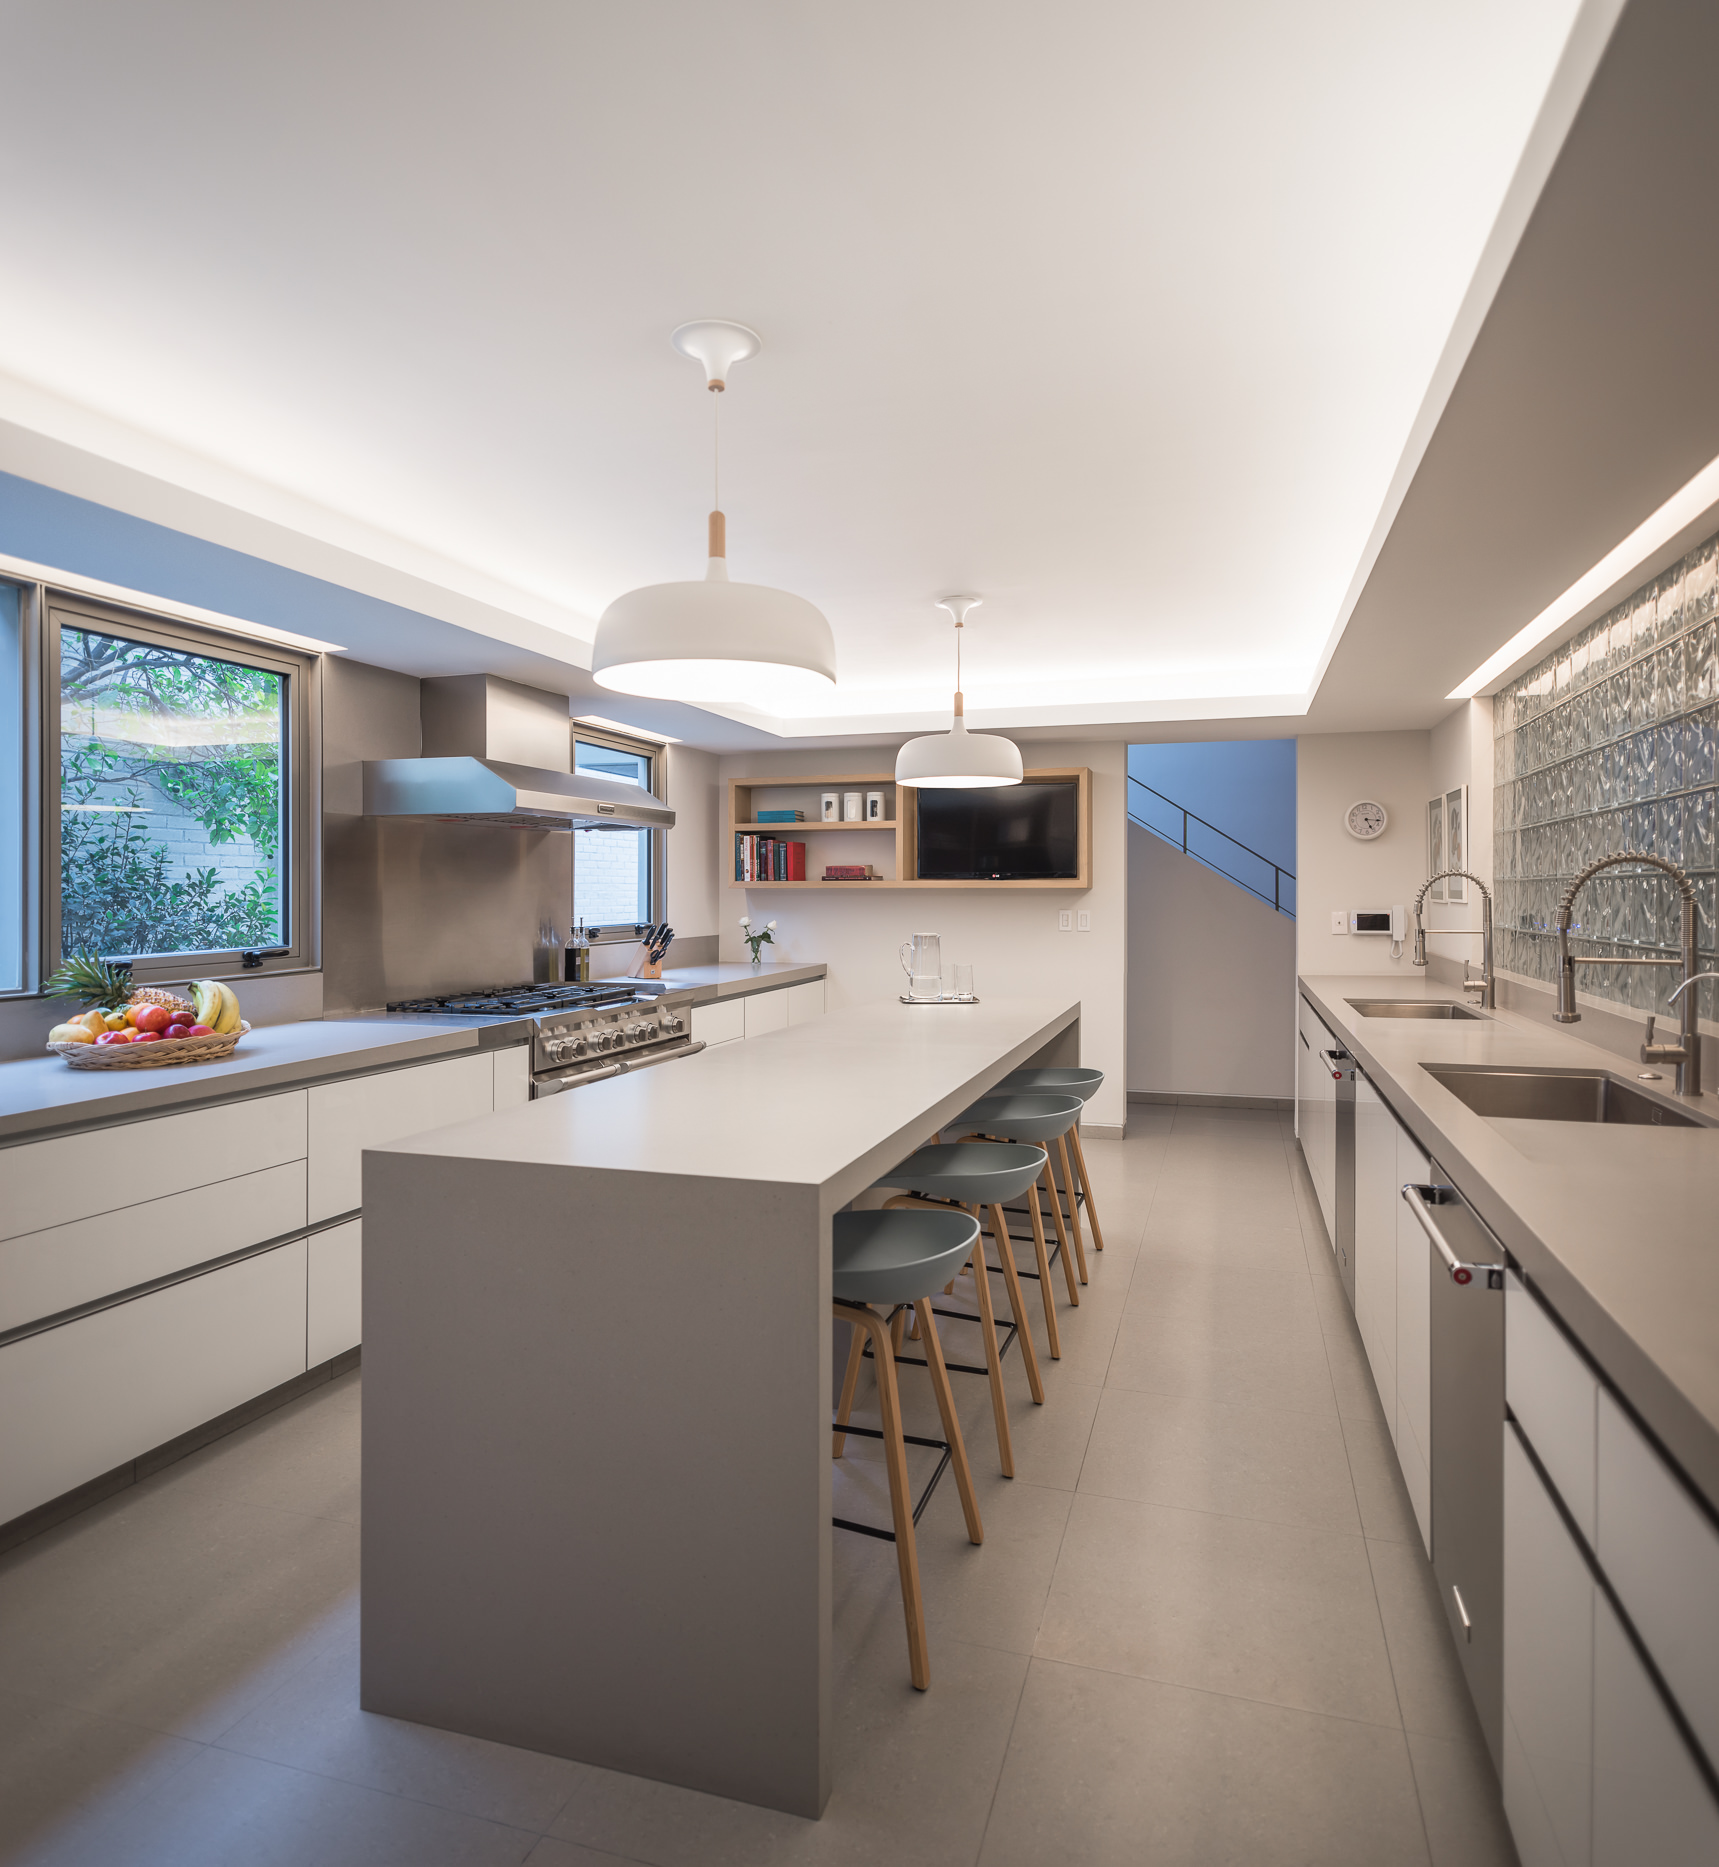 White-and-gray-kitchen-of-the-house-with-lovely-lighting-58050